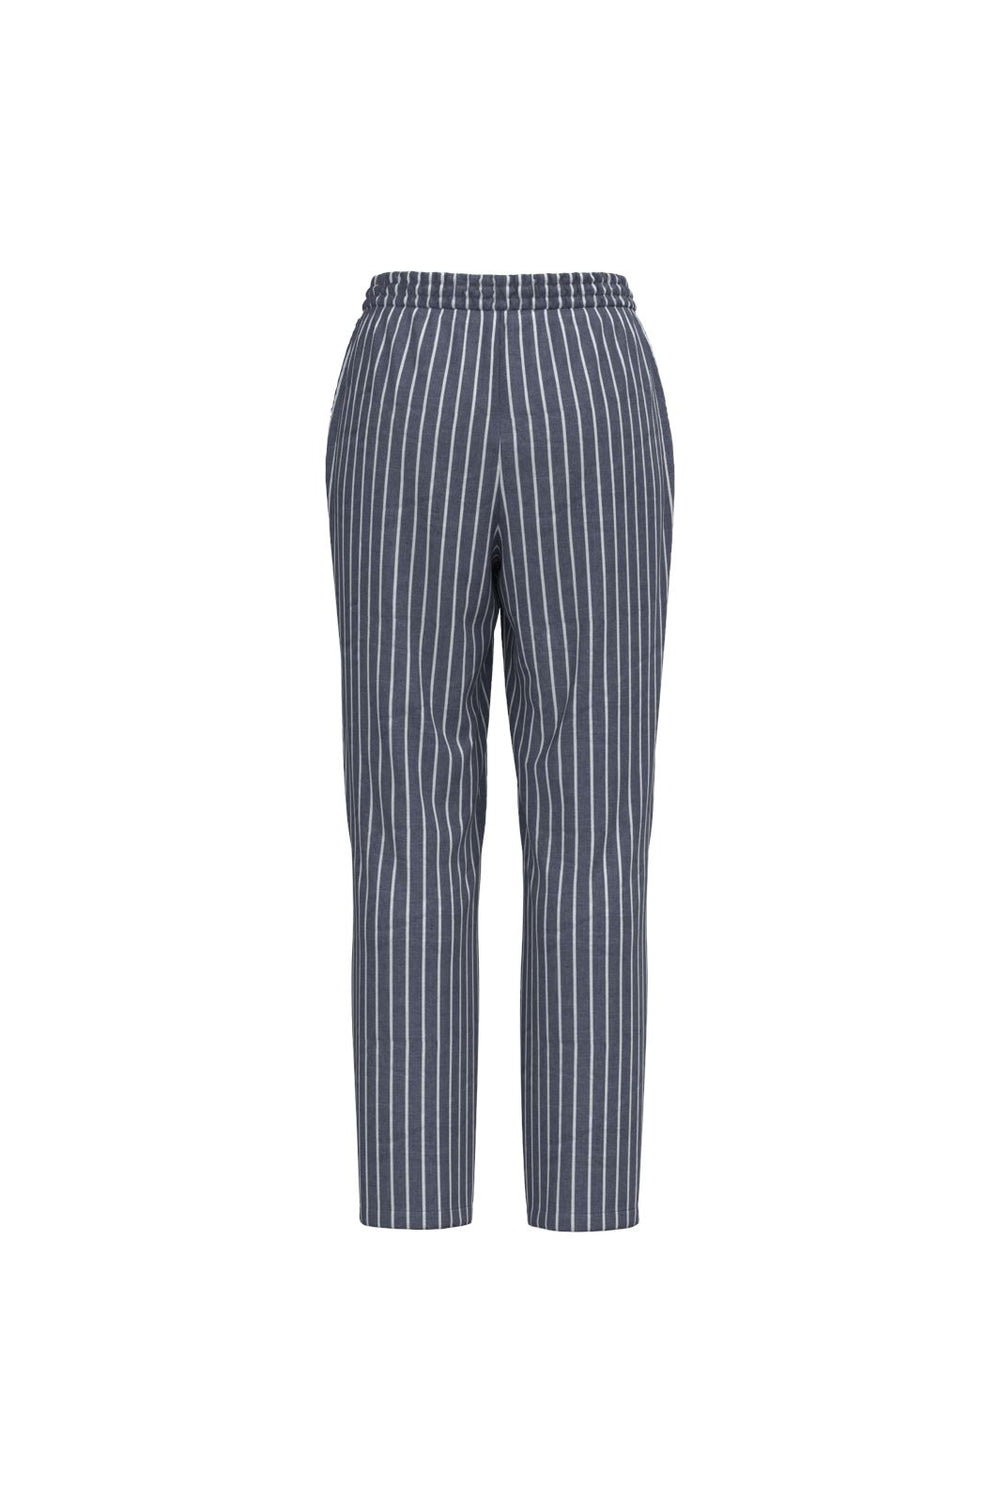 Pieces - Pcpenny Ankle Pants Pwp Mm - 4476877 Moonlight Blue Bright White